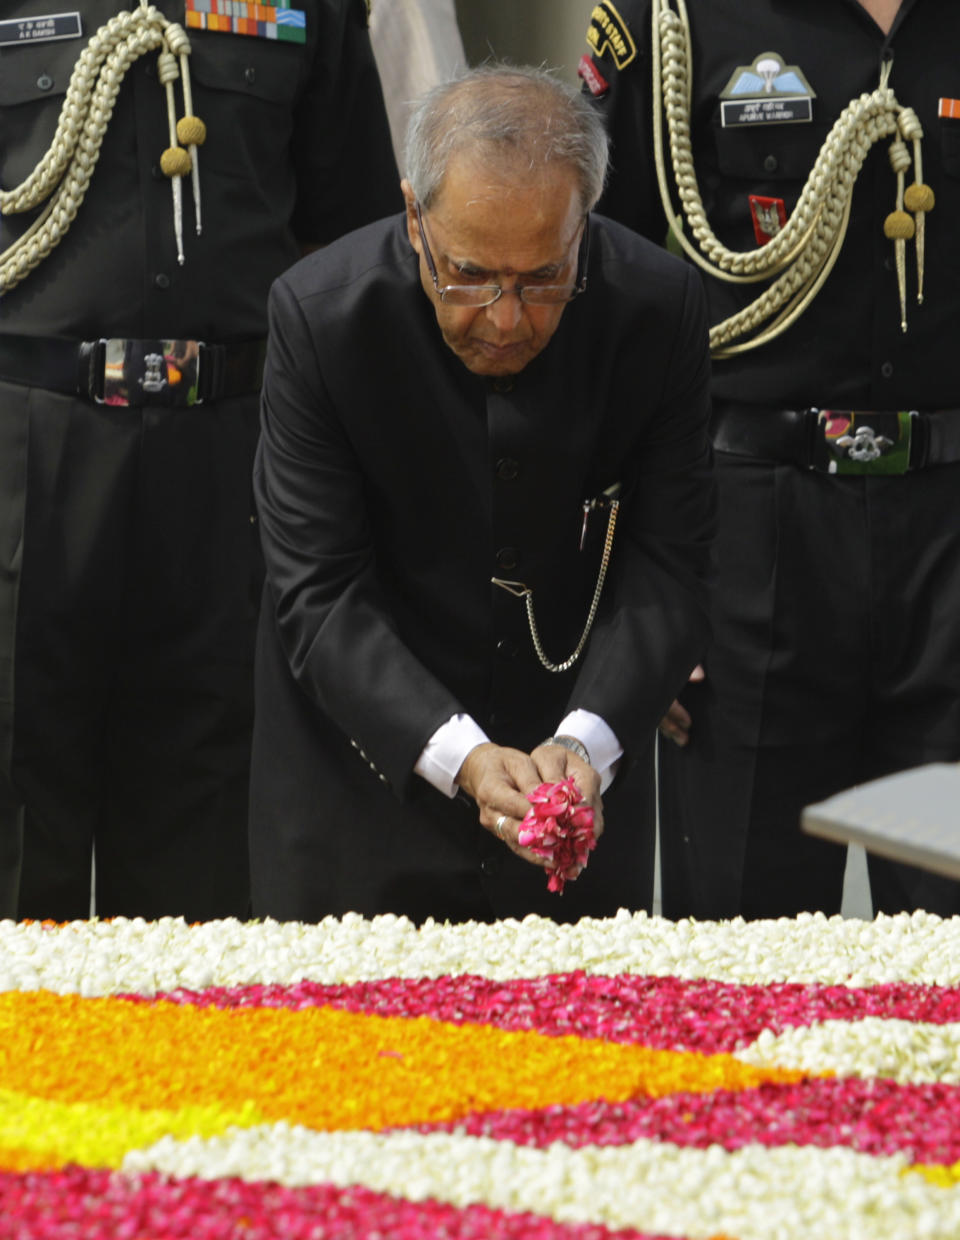 Political veteran Pranab Mukherjee offers flower petals at Rajghat, the memorial to the late Mahatma Gandhi, in New Delhi, India, Wednesday, July 25, 2012. Mukherjee was sworn in Wednesday as India's 13th president in an elaborate and symbolic ceremony in Parliament. (AP Photo/Altaf Qadri)